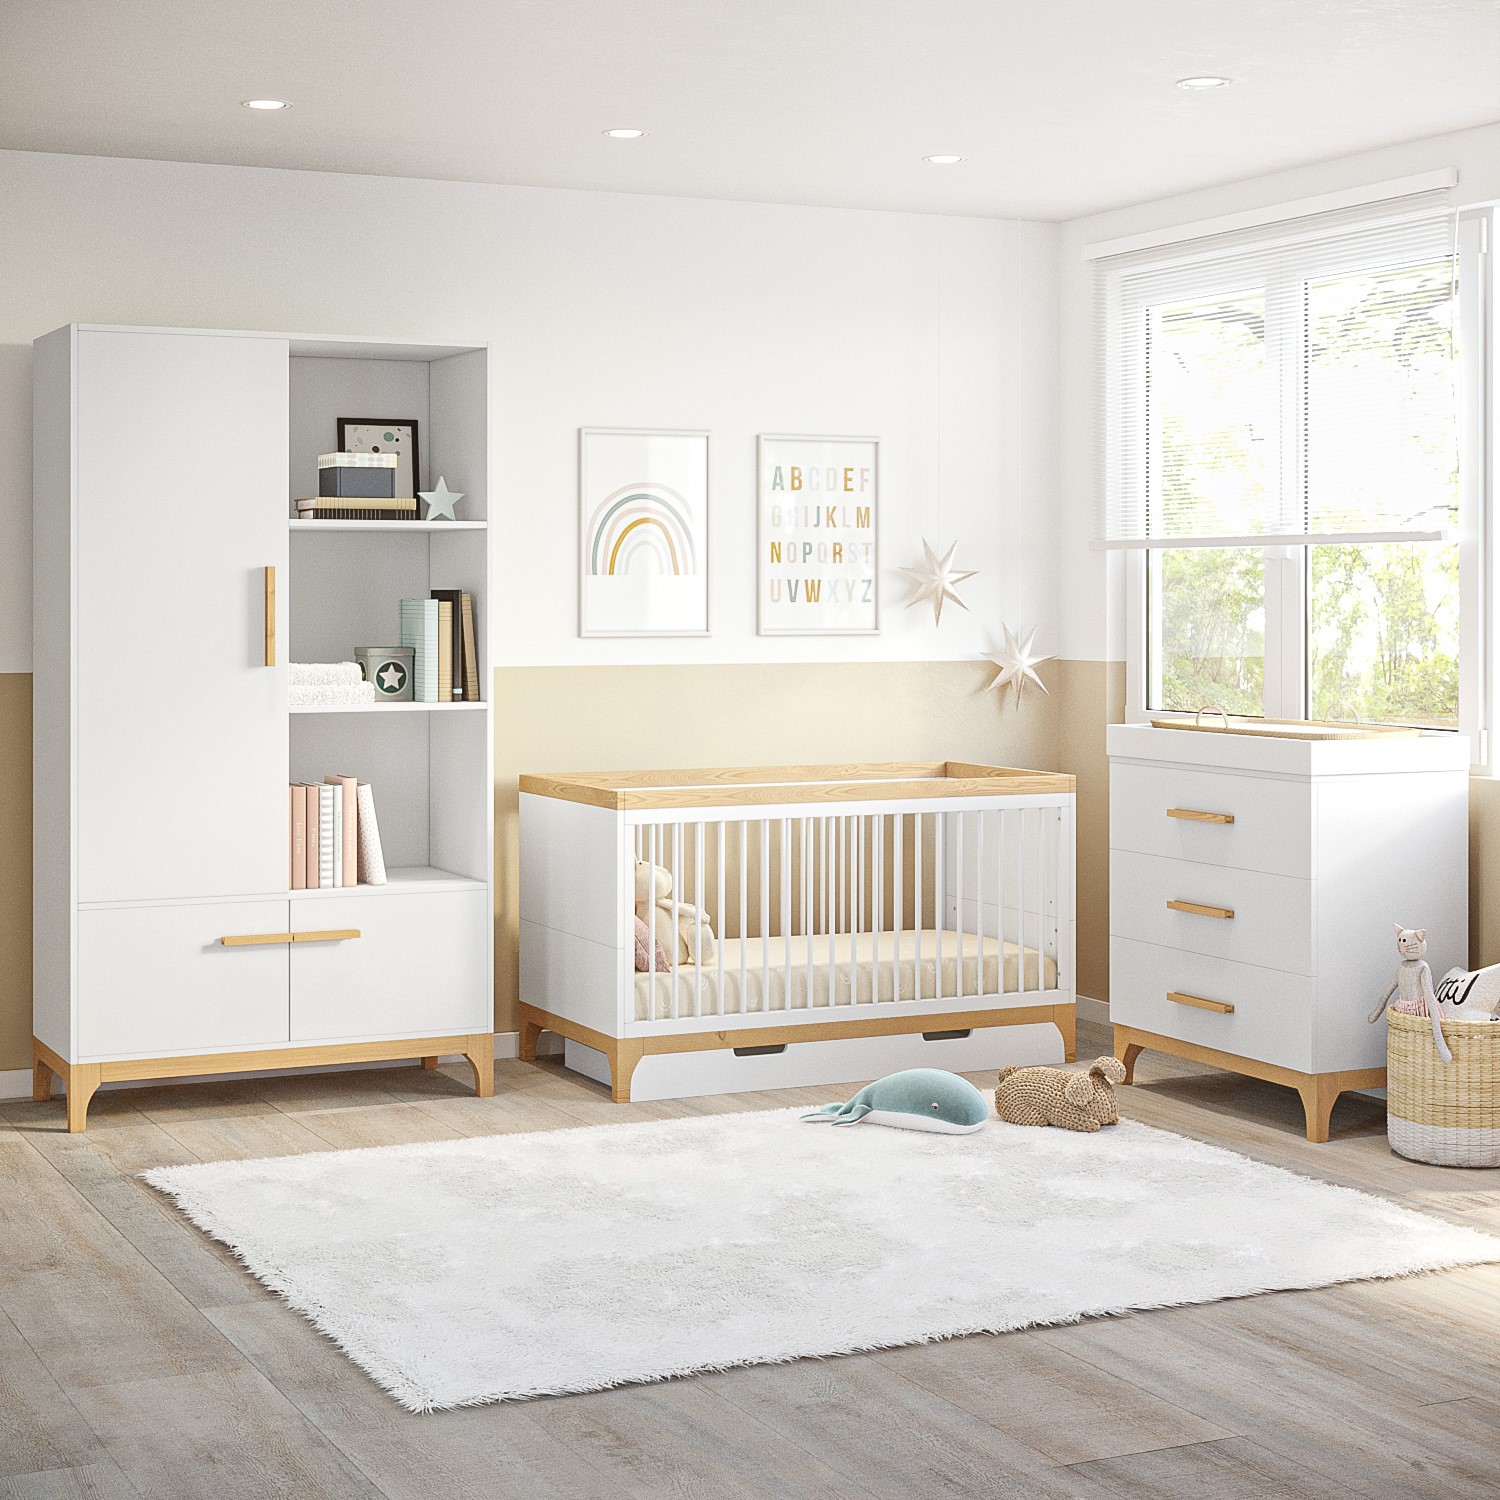 Photo of 3 piece nursery furniture set in white and pine - rue